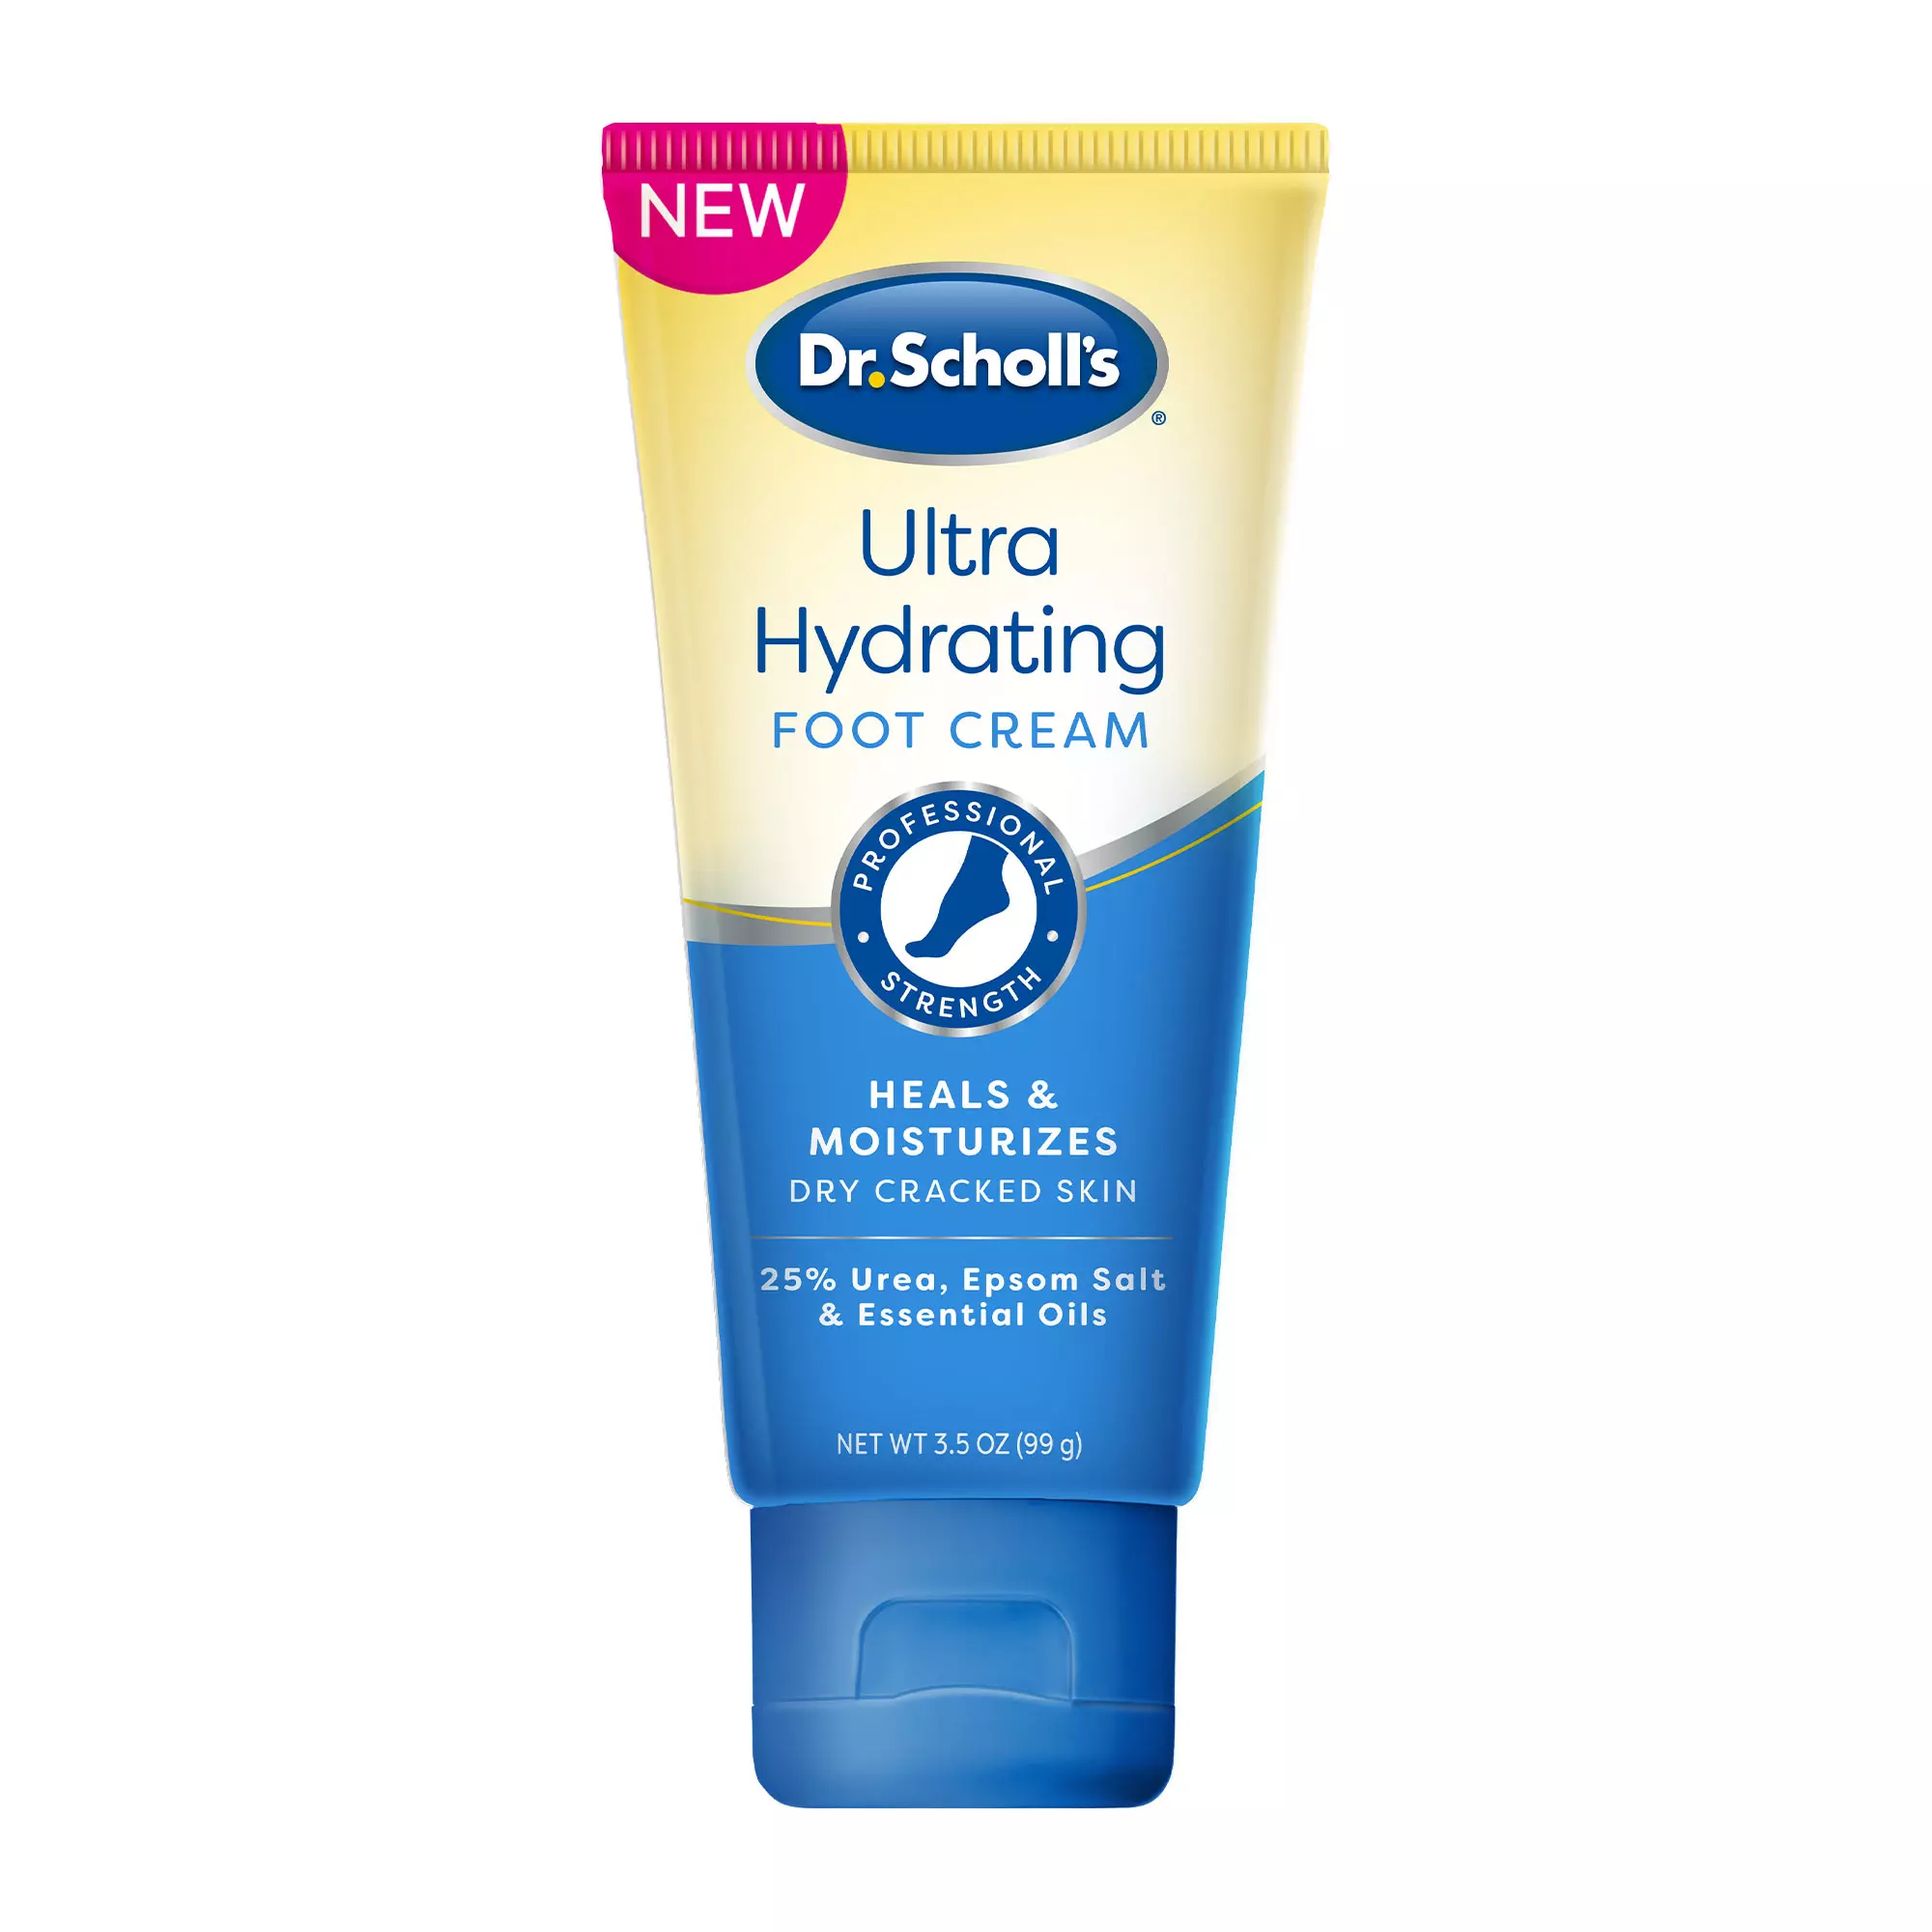 Dr.Scholl’s Ultra Hydrating Foot Cream